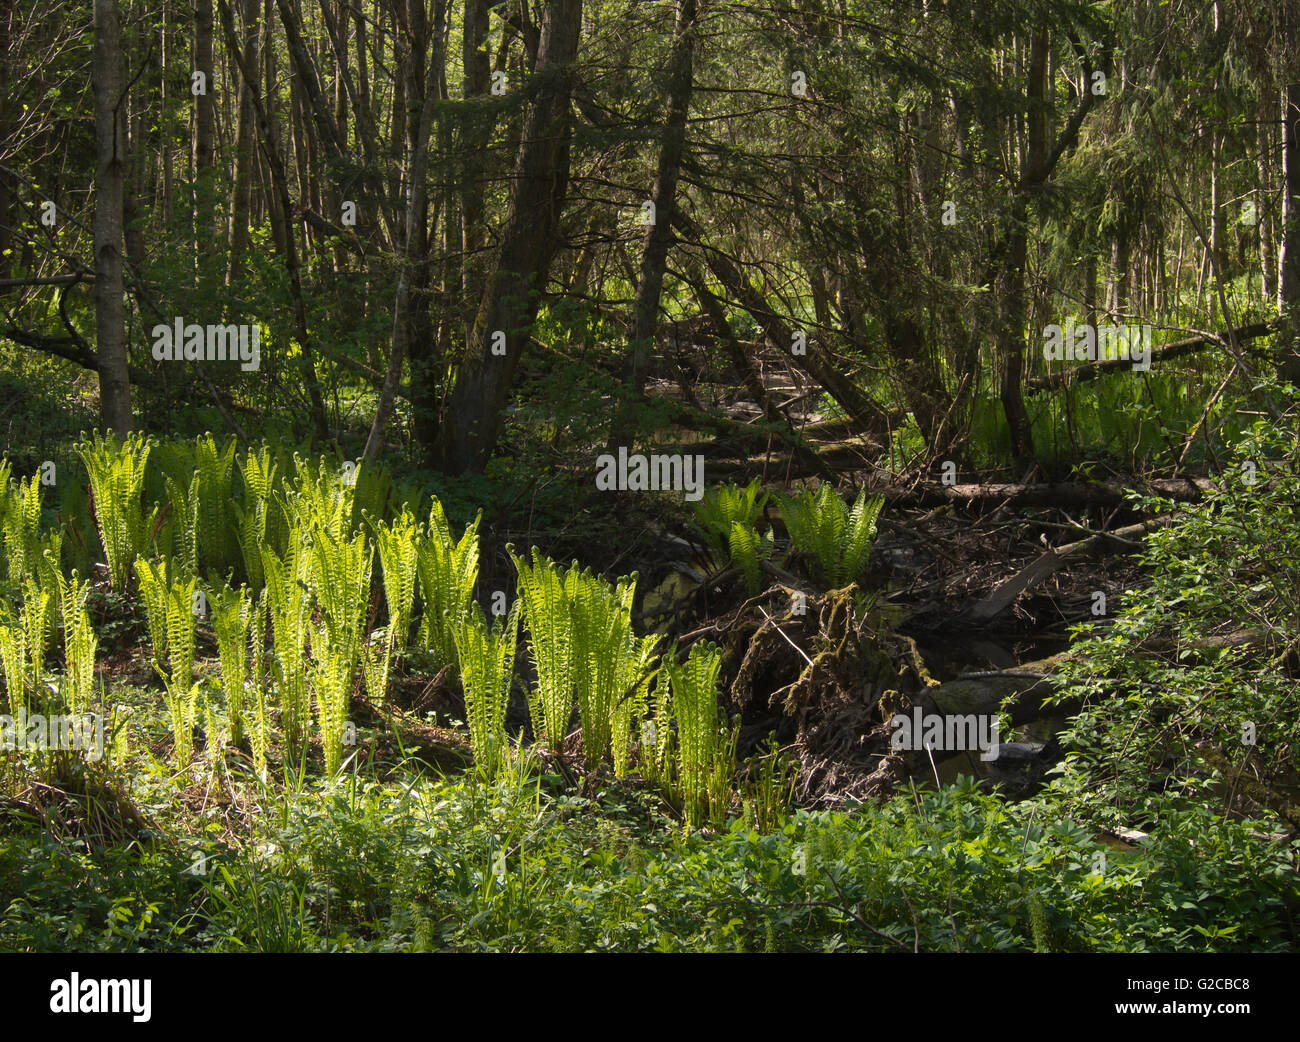 Sunlit fern or bracken, quiet stream in shadow of old trees, spring scenery from a forest in Oslo Norway Stock Photo